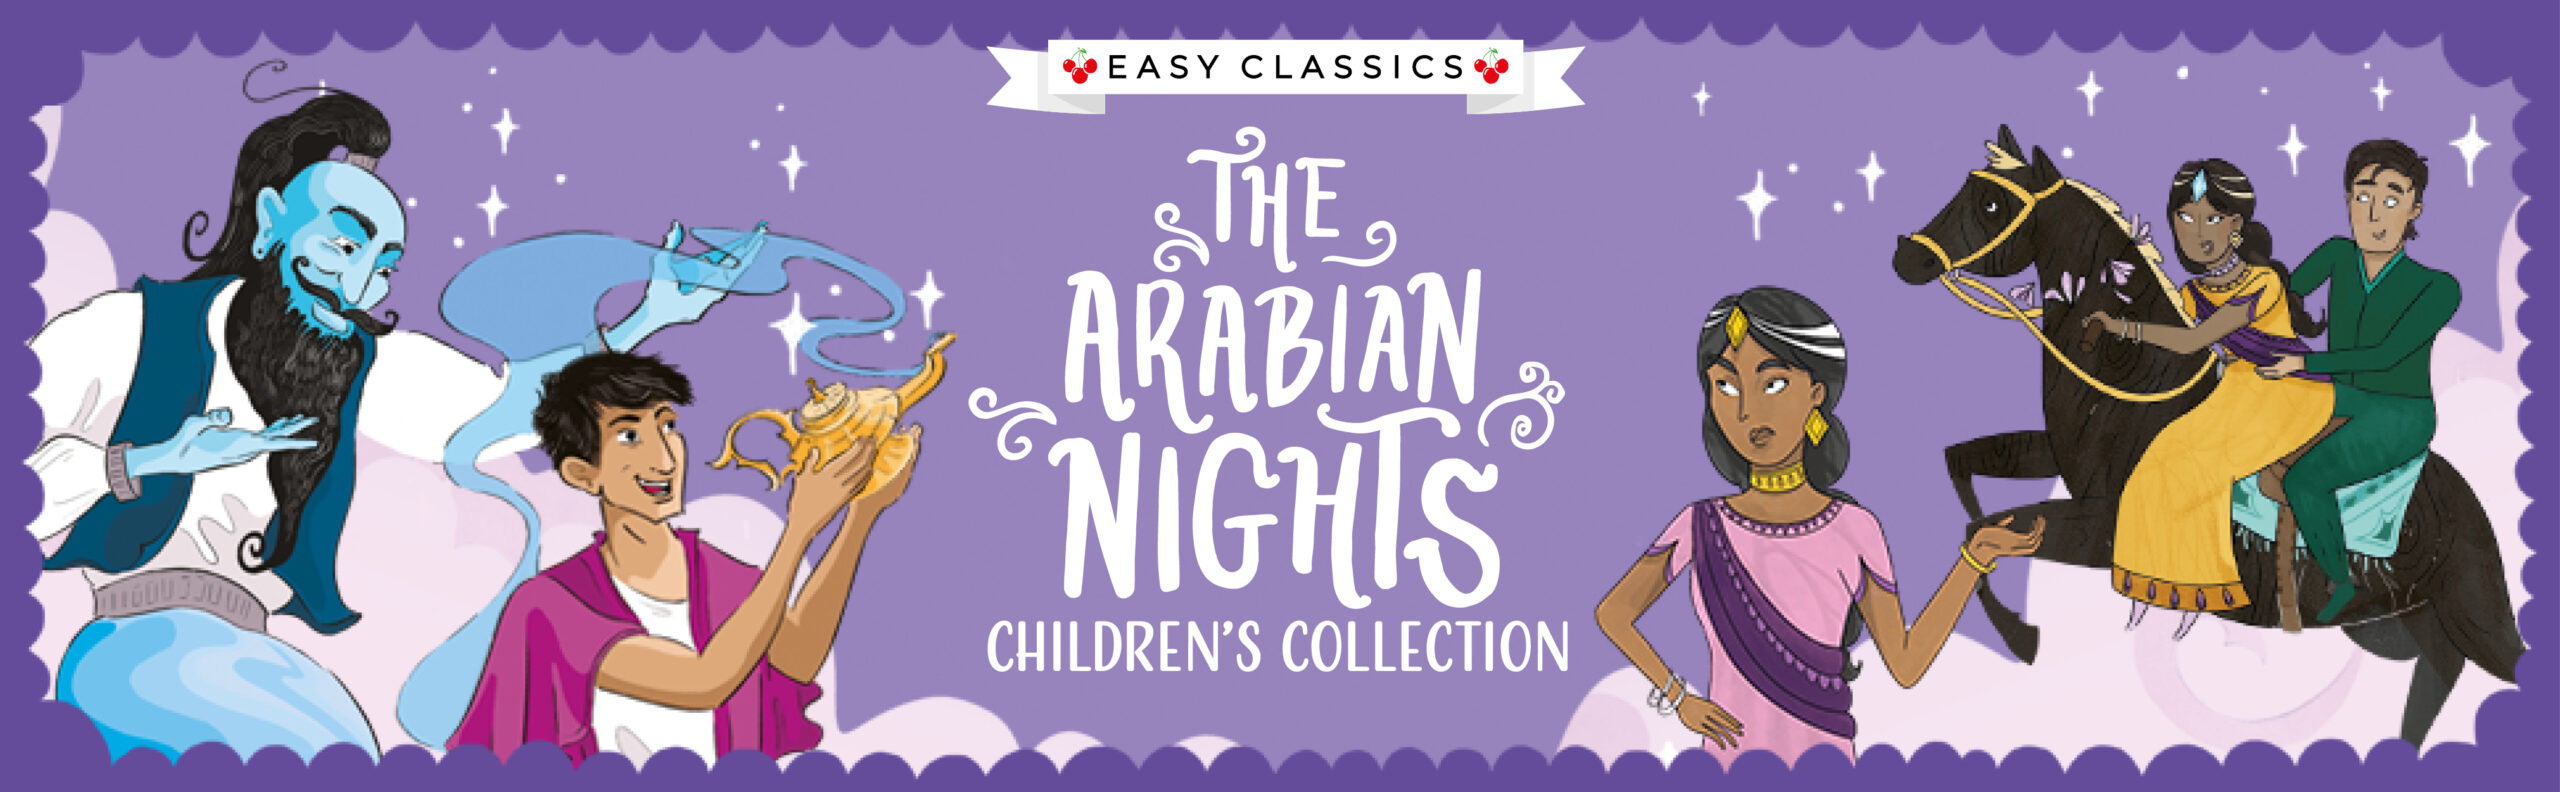 The Arabian Nights Children’s Collection